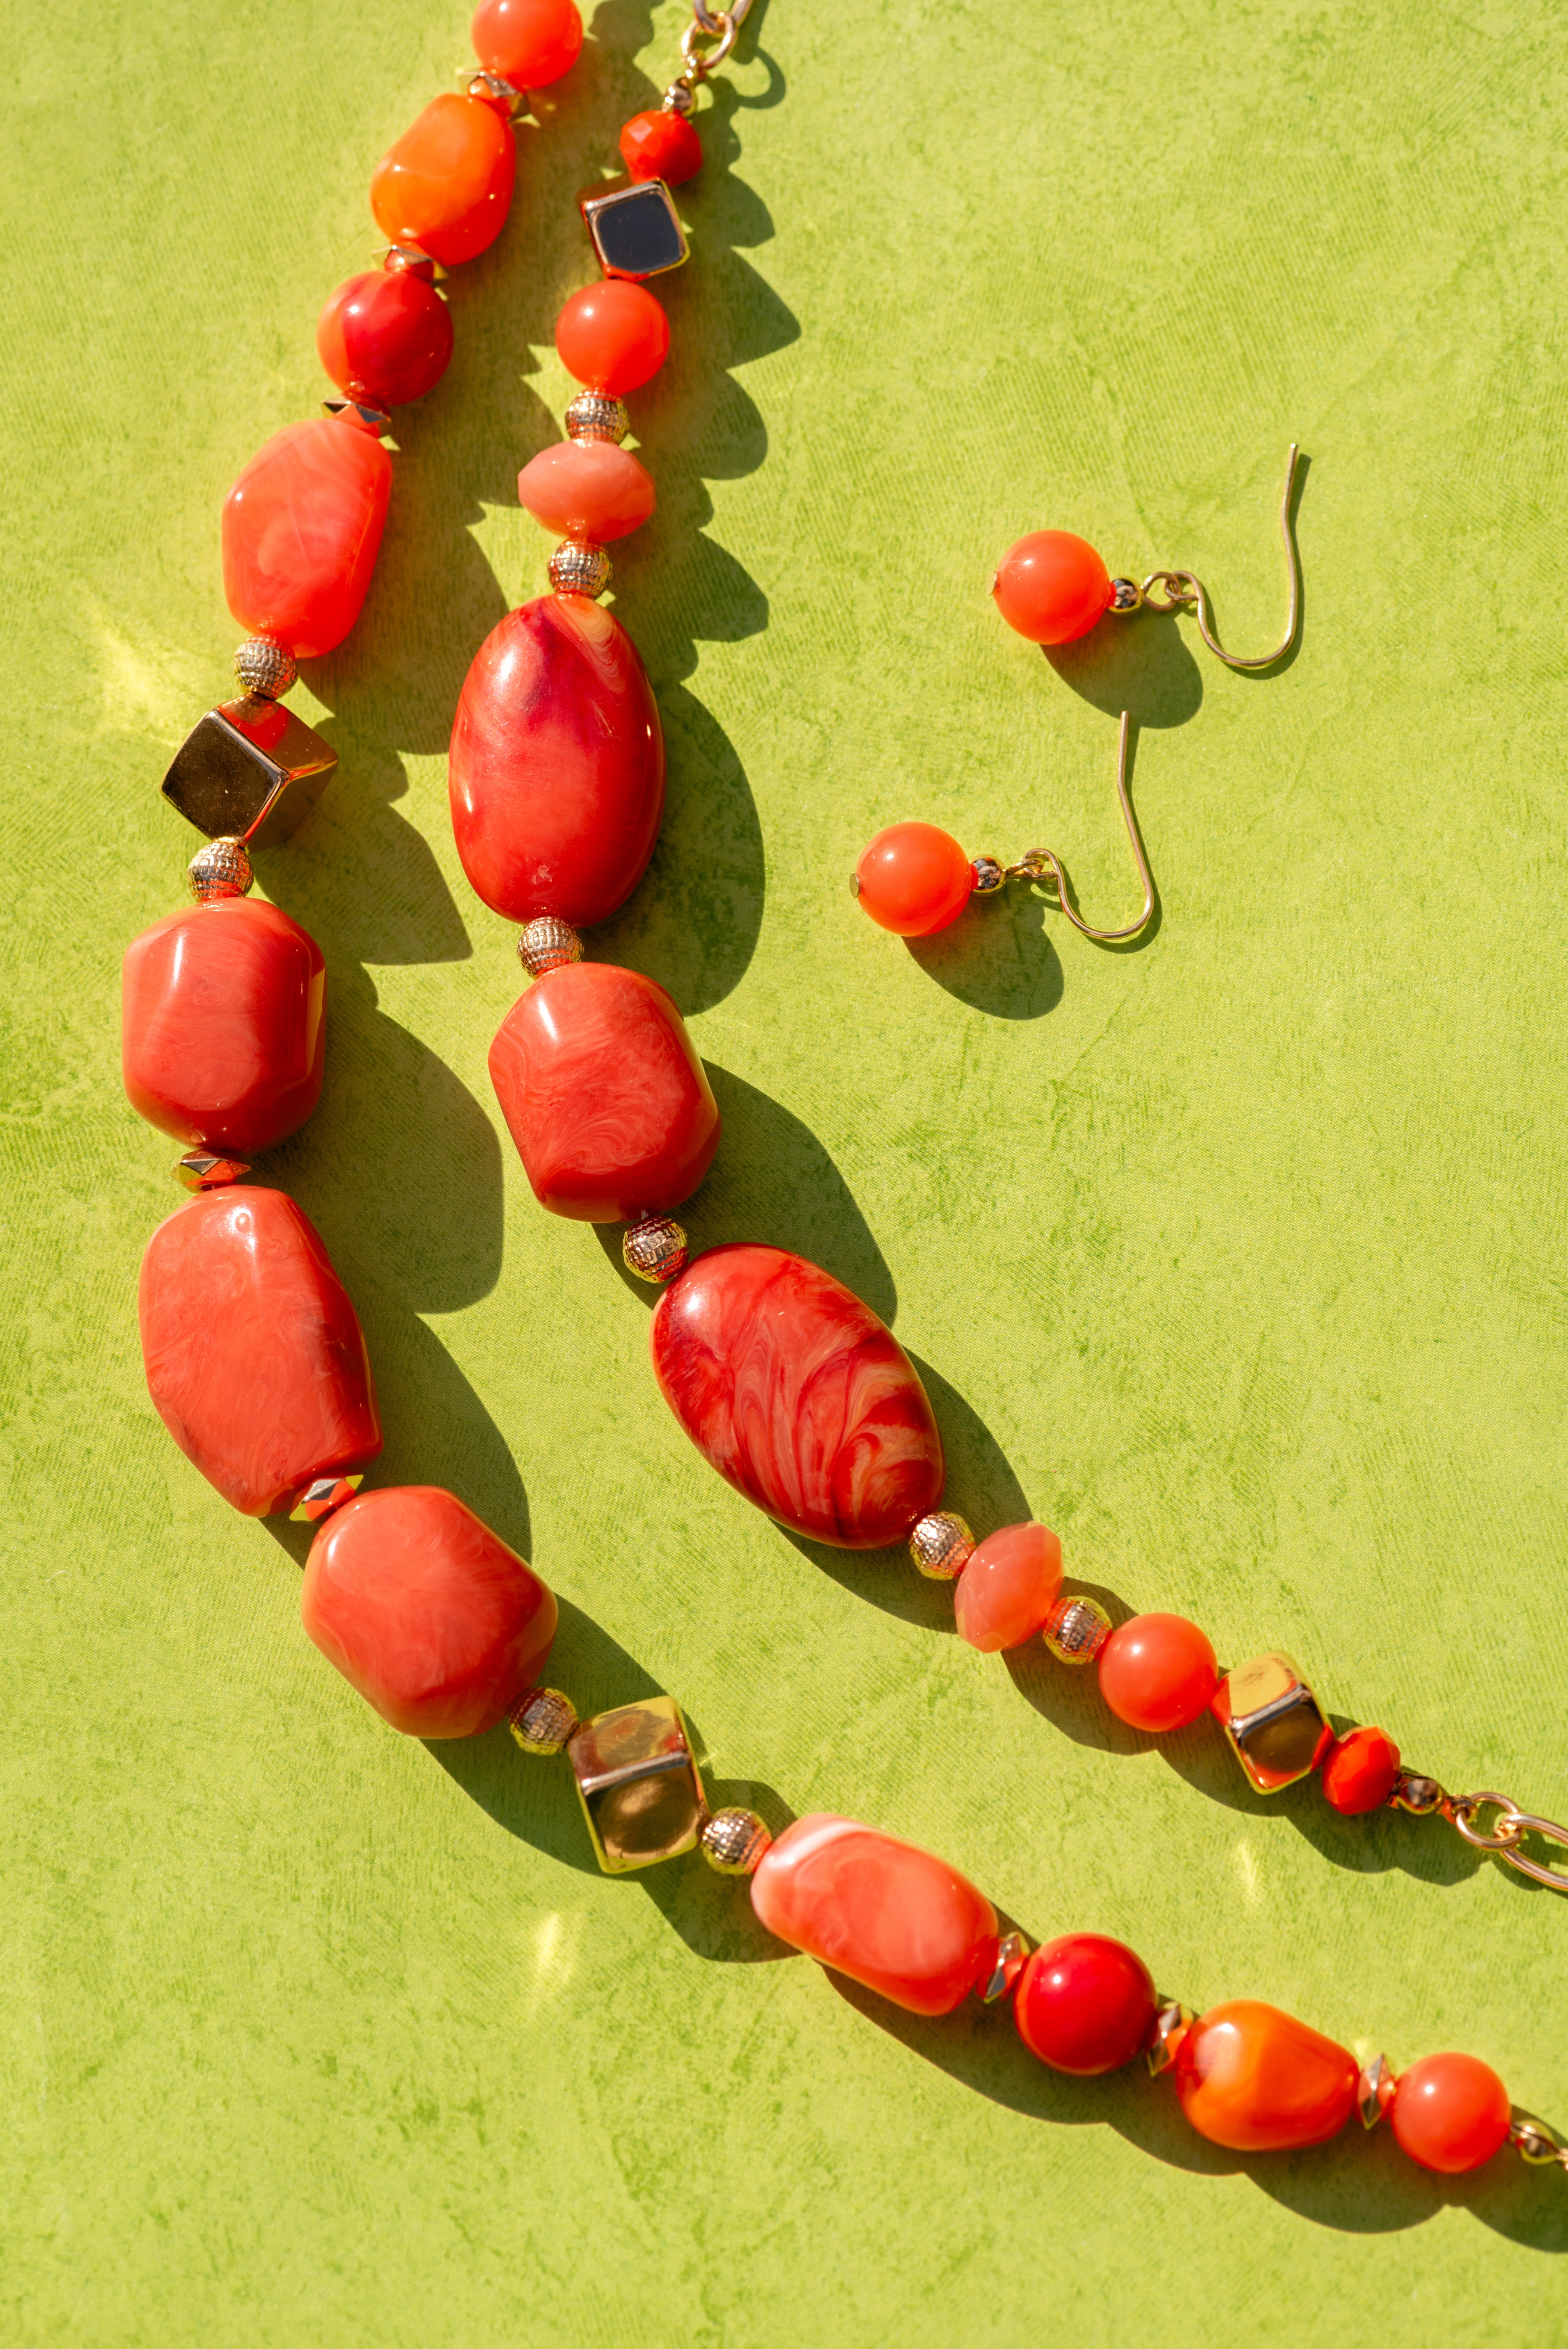 Type 3 Coral Street Necklace